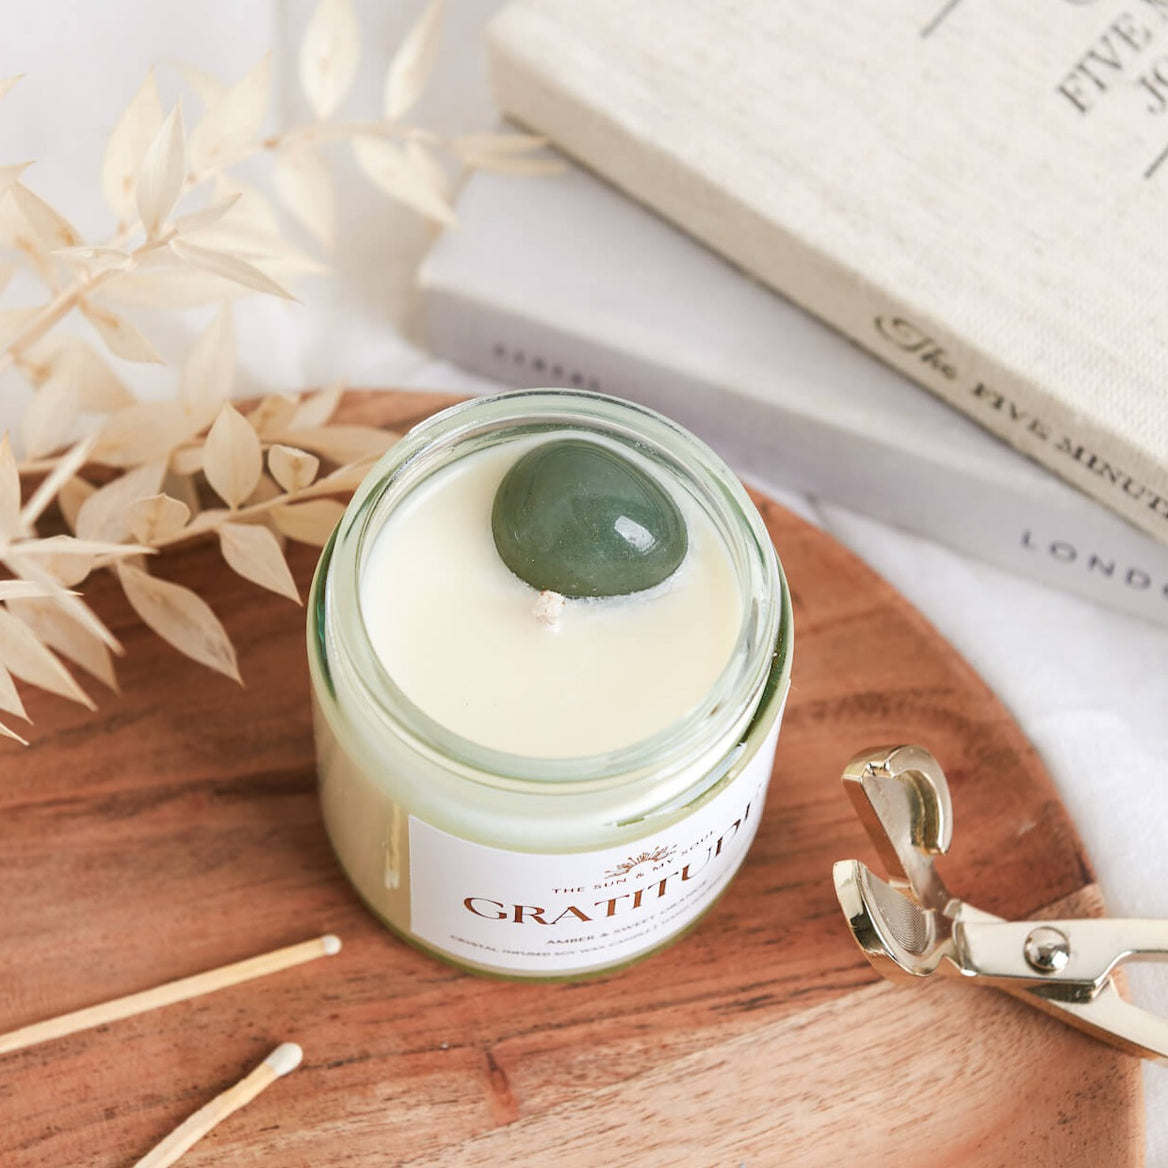 Gratitude Crystal Candle with Green Aventurine, Scent - Amber, Sweet Orange